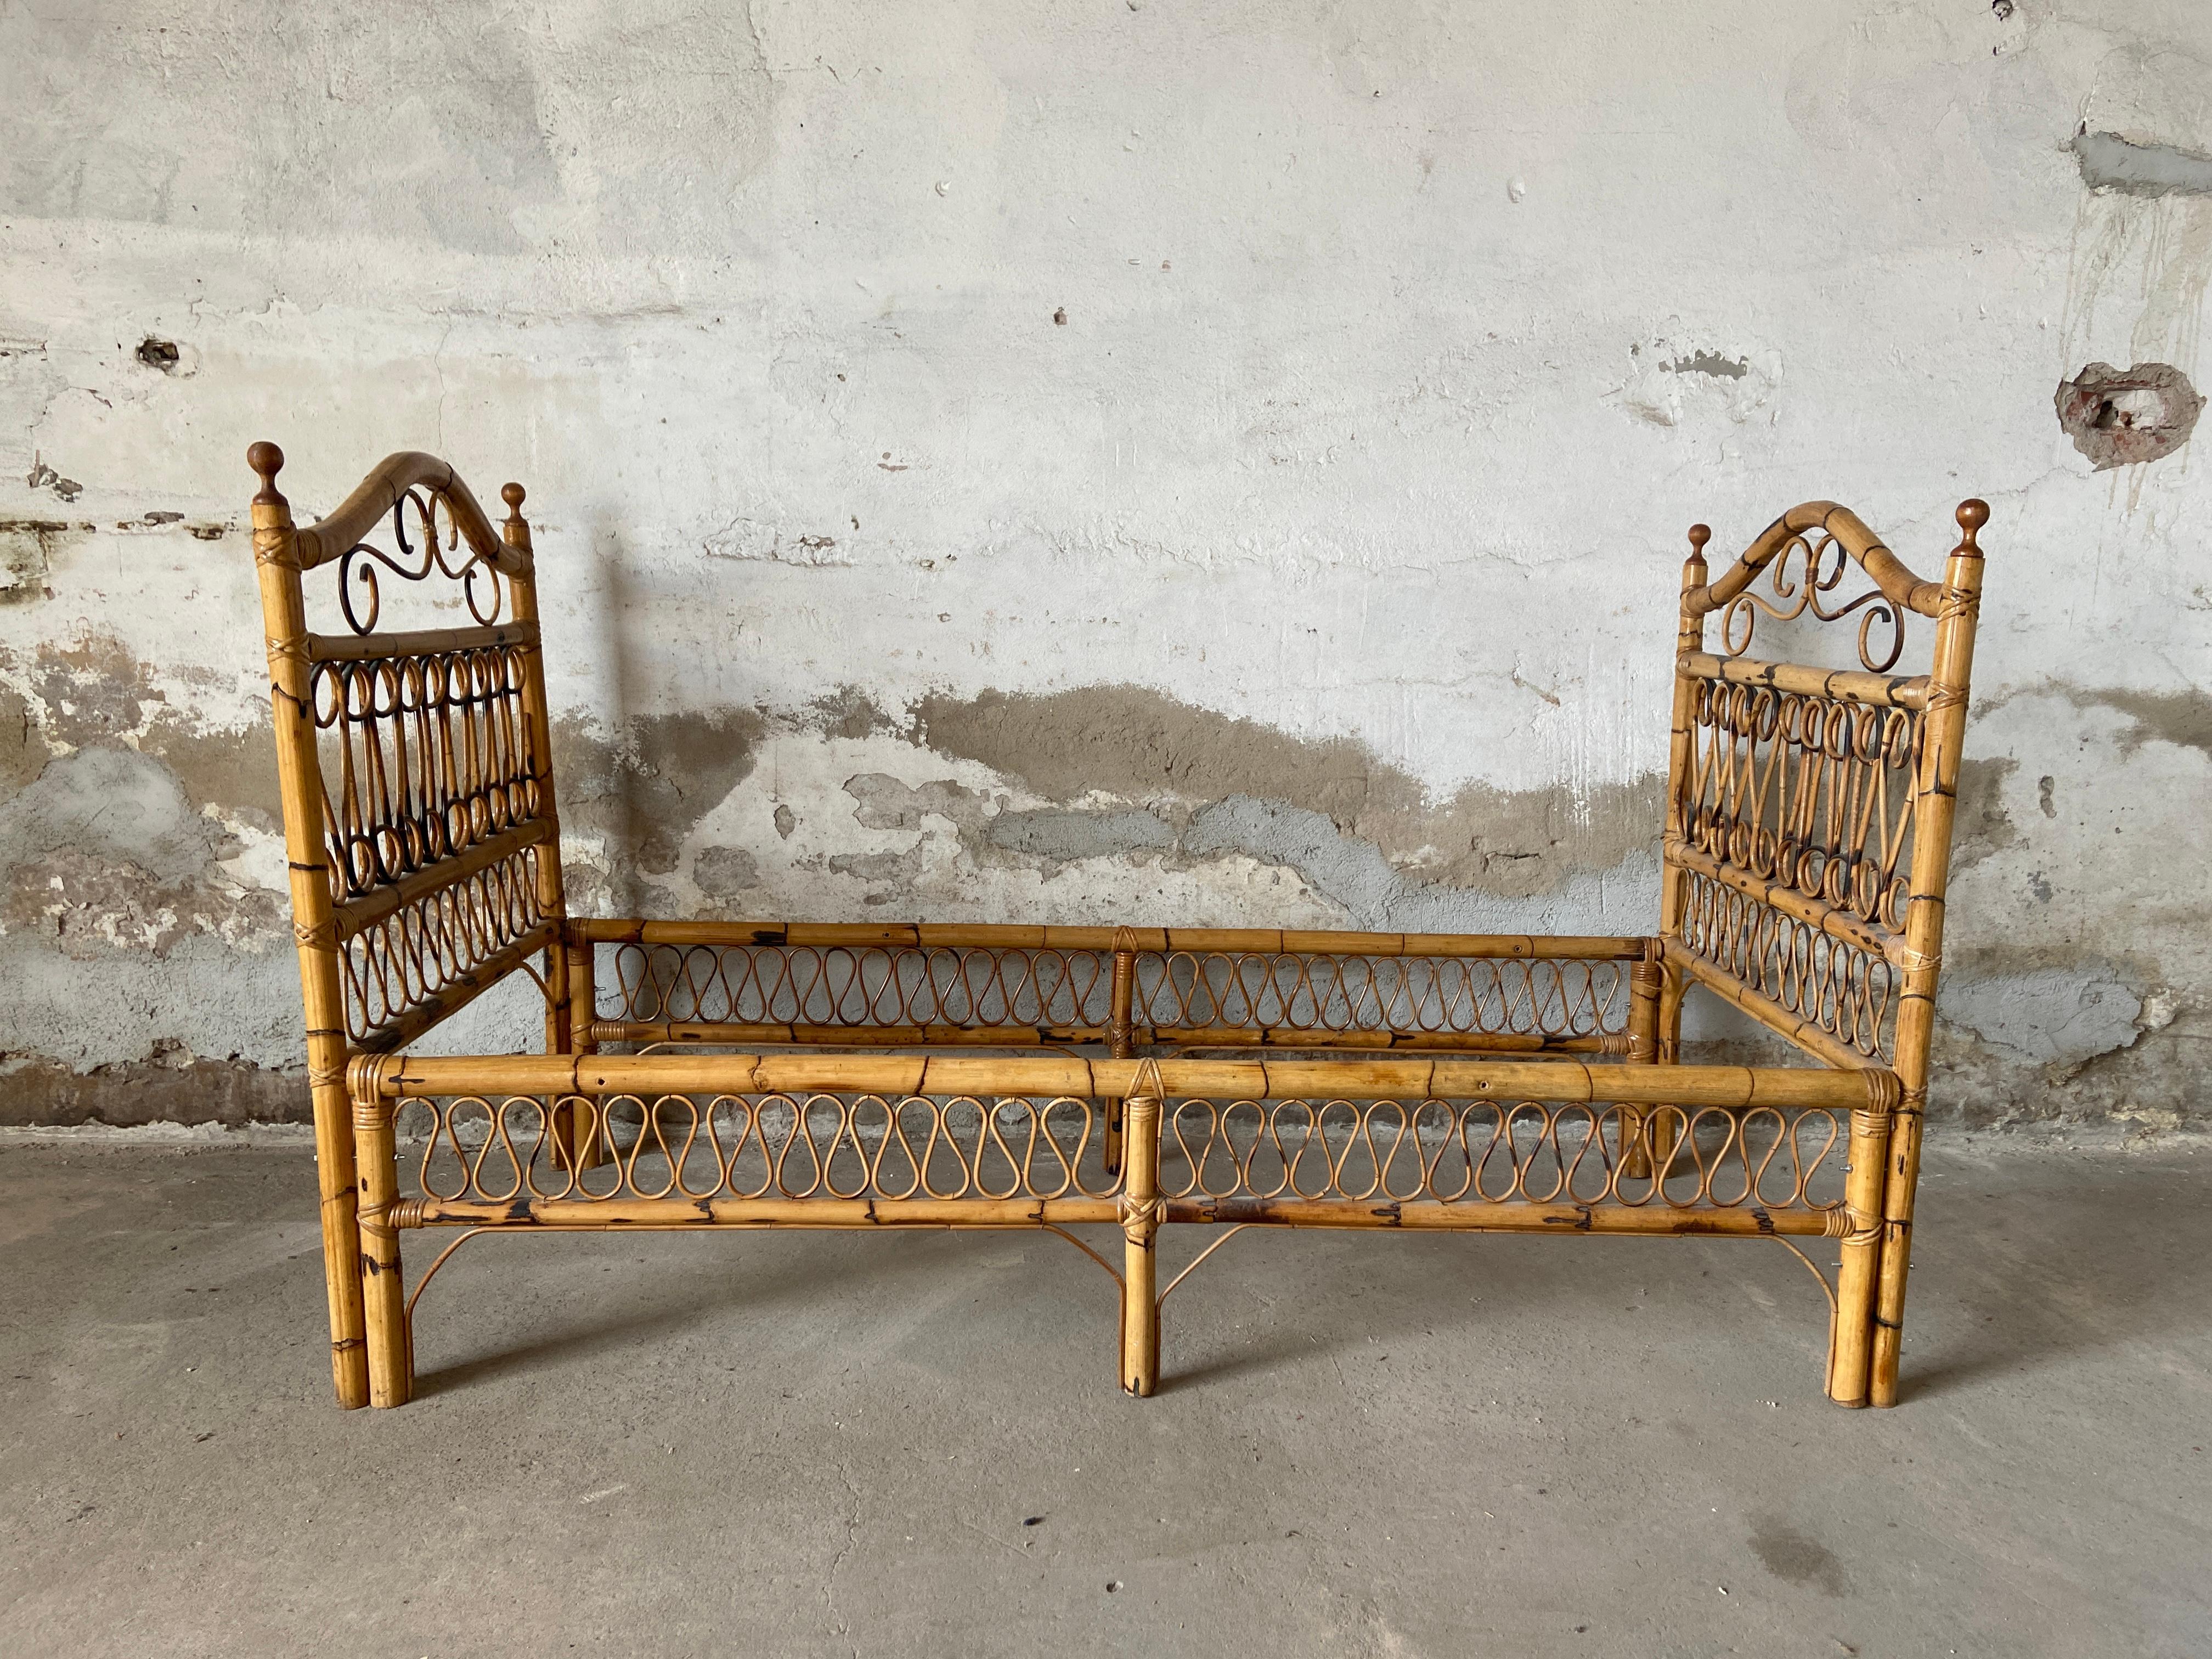 Mid-Century Modern Italian bamboo and rattan single bed or day bed from 1970s.
The Bed is in real good vintage conditions, wear consistent with age and use.
Quotation for bed net and mattress on request.